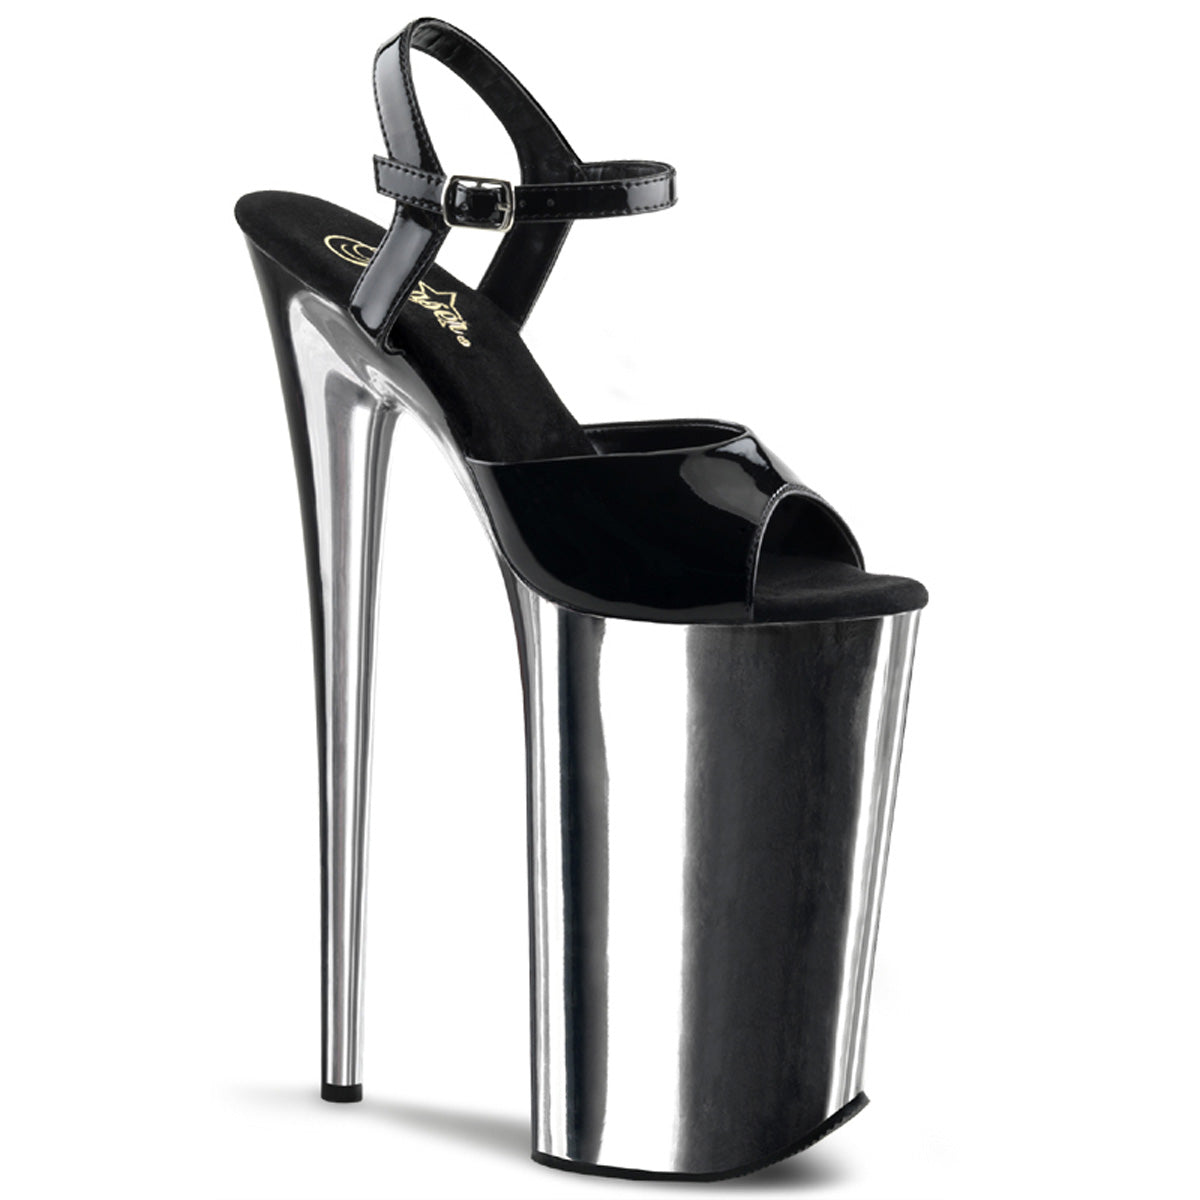 Inch Stilettos Were So Last Year: Are 12 Inch Heels The, 48% OFF